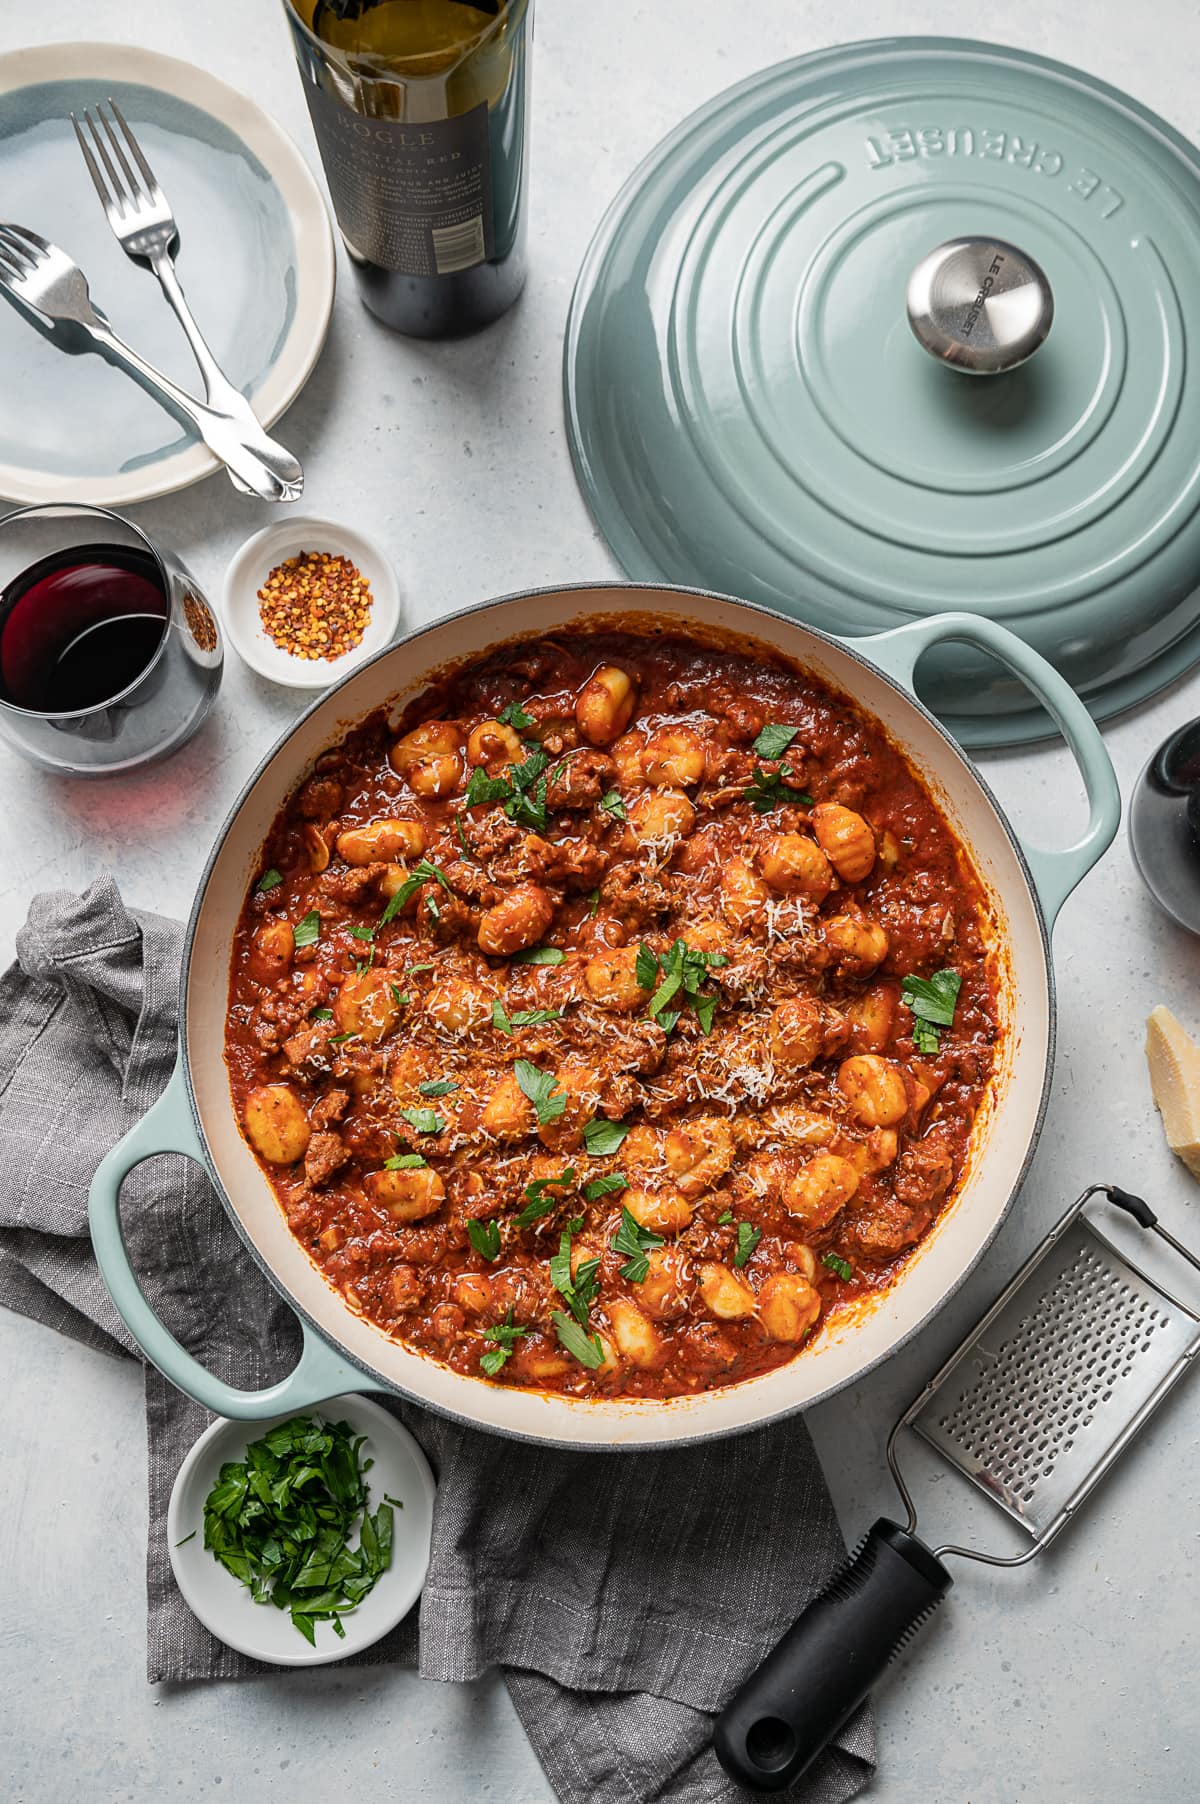 large aqua pan with sausage and gnocchi with red tomato sauce, glasses of red wine, bowl of green parsley, bowl of red pepper flakes, plates, forks, bottle of wine